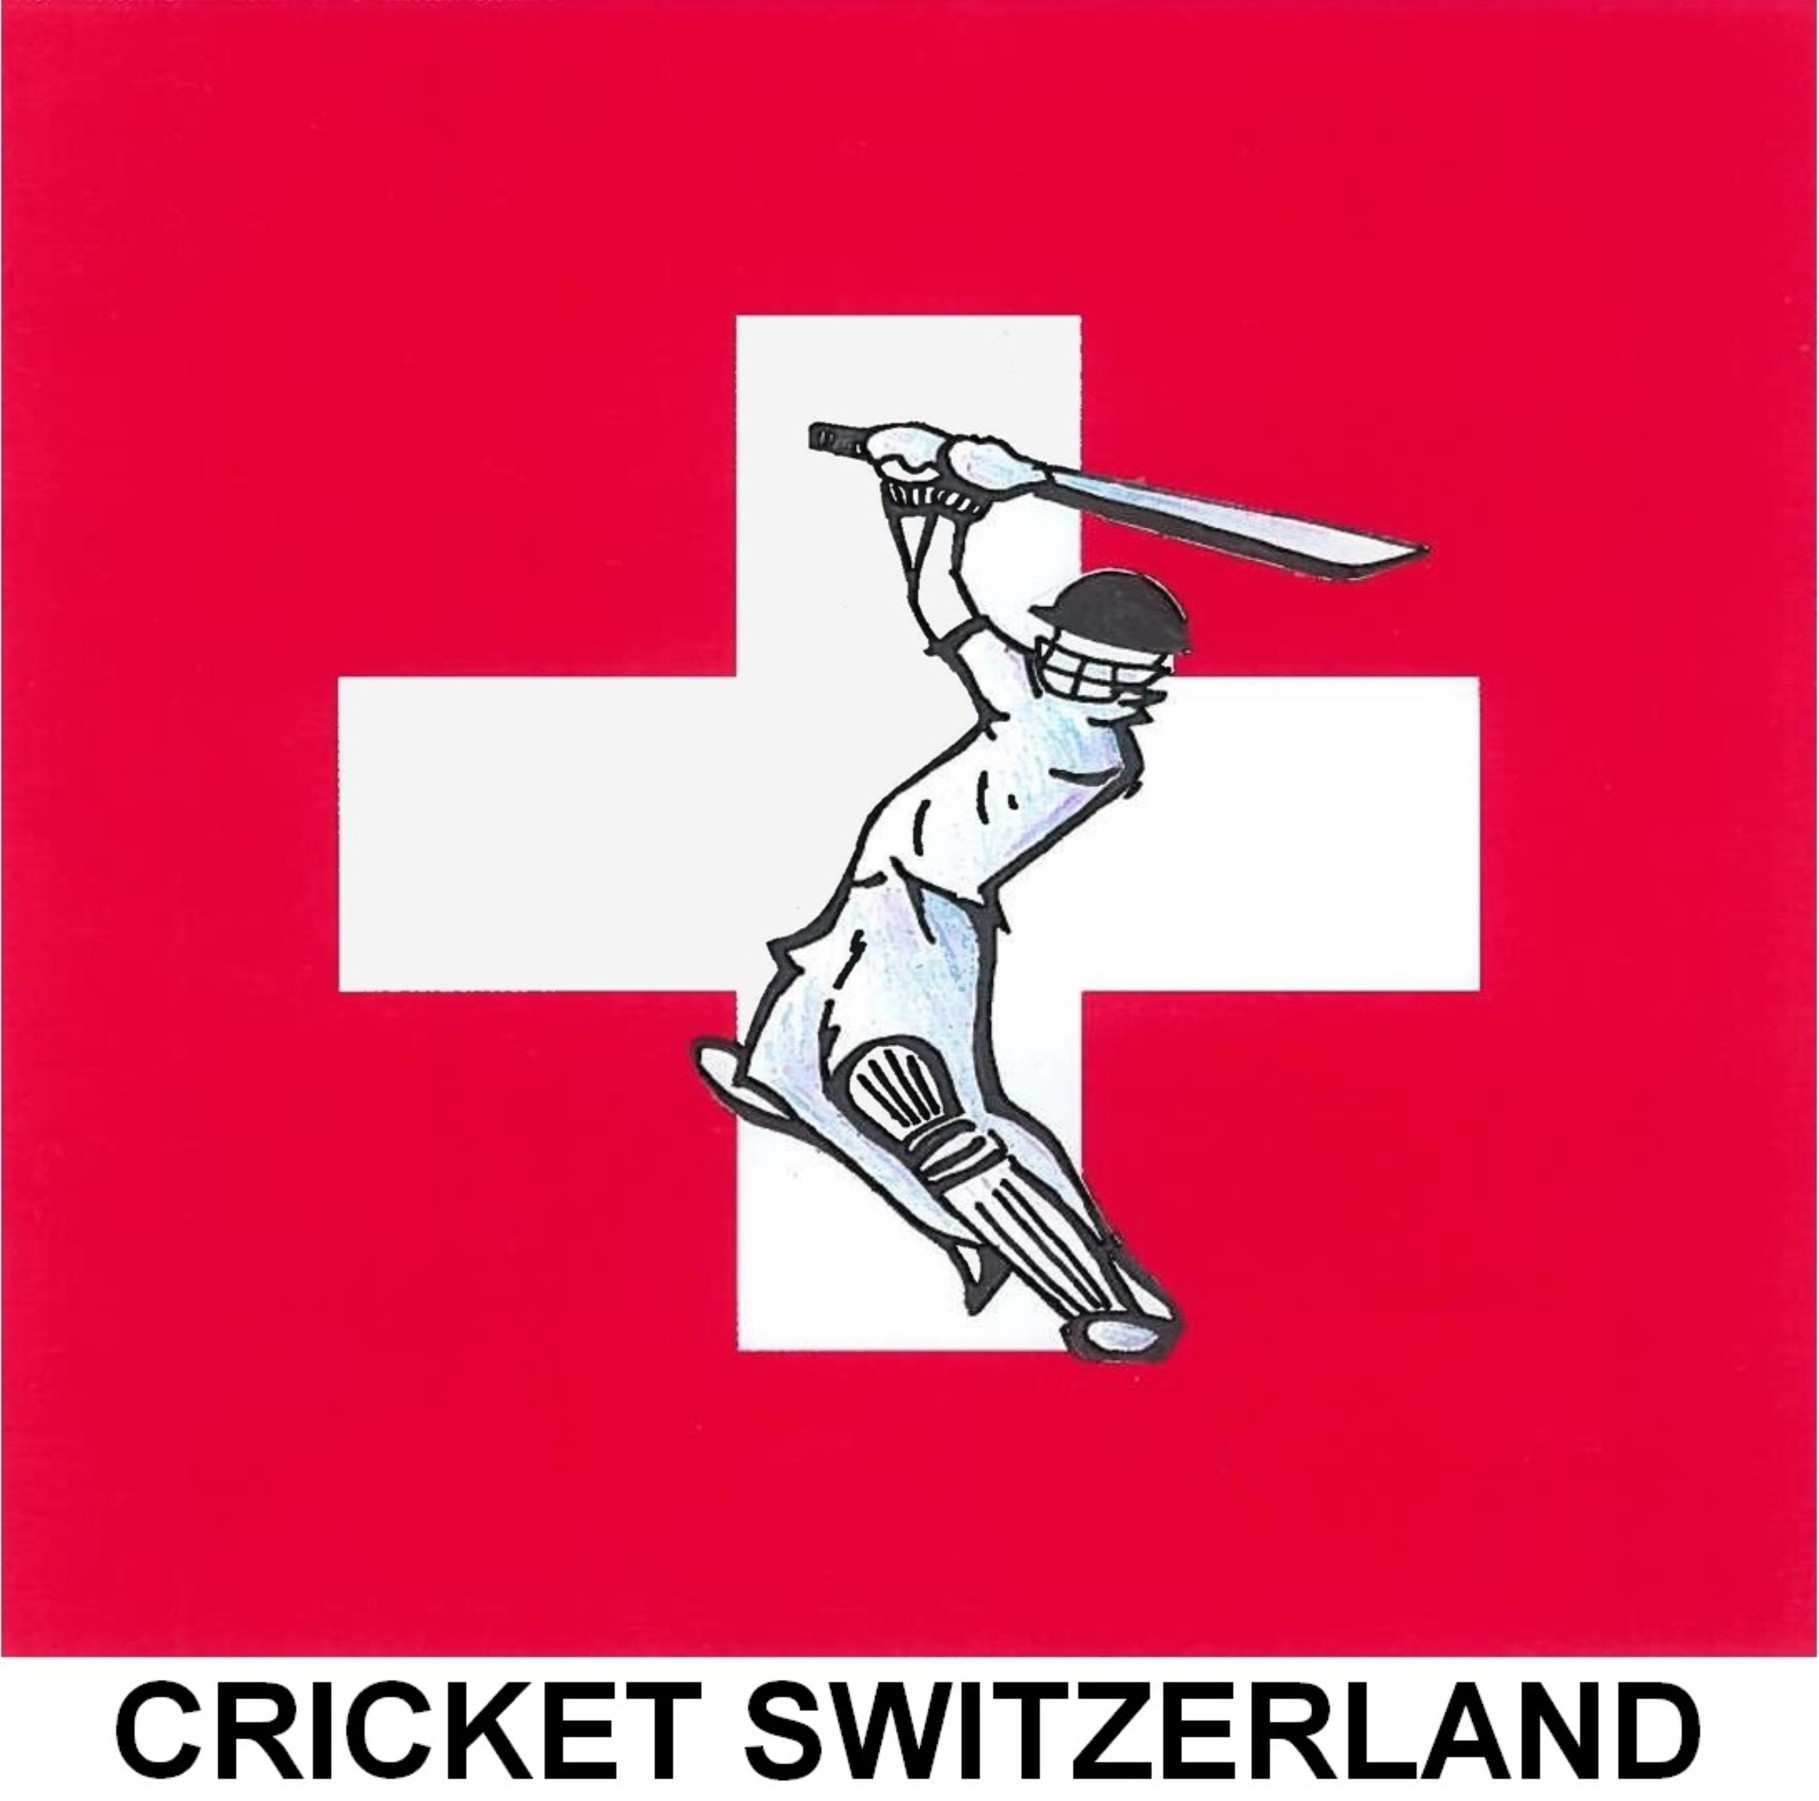 Cricket Switzerland is set to submit an application to the ICC for associate membership ©Cricket Switzerland